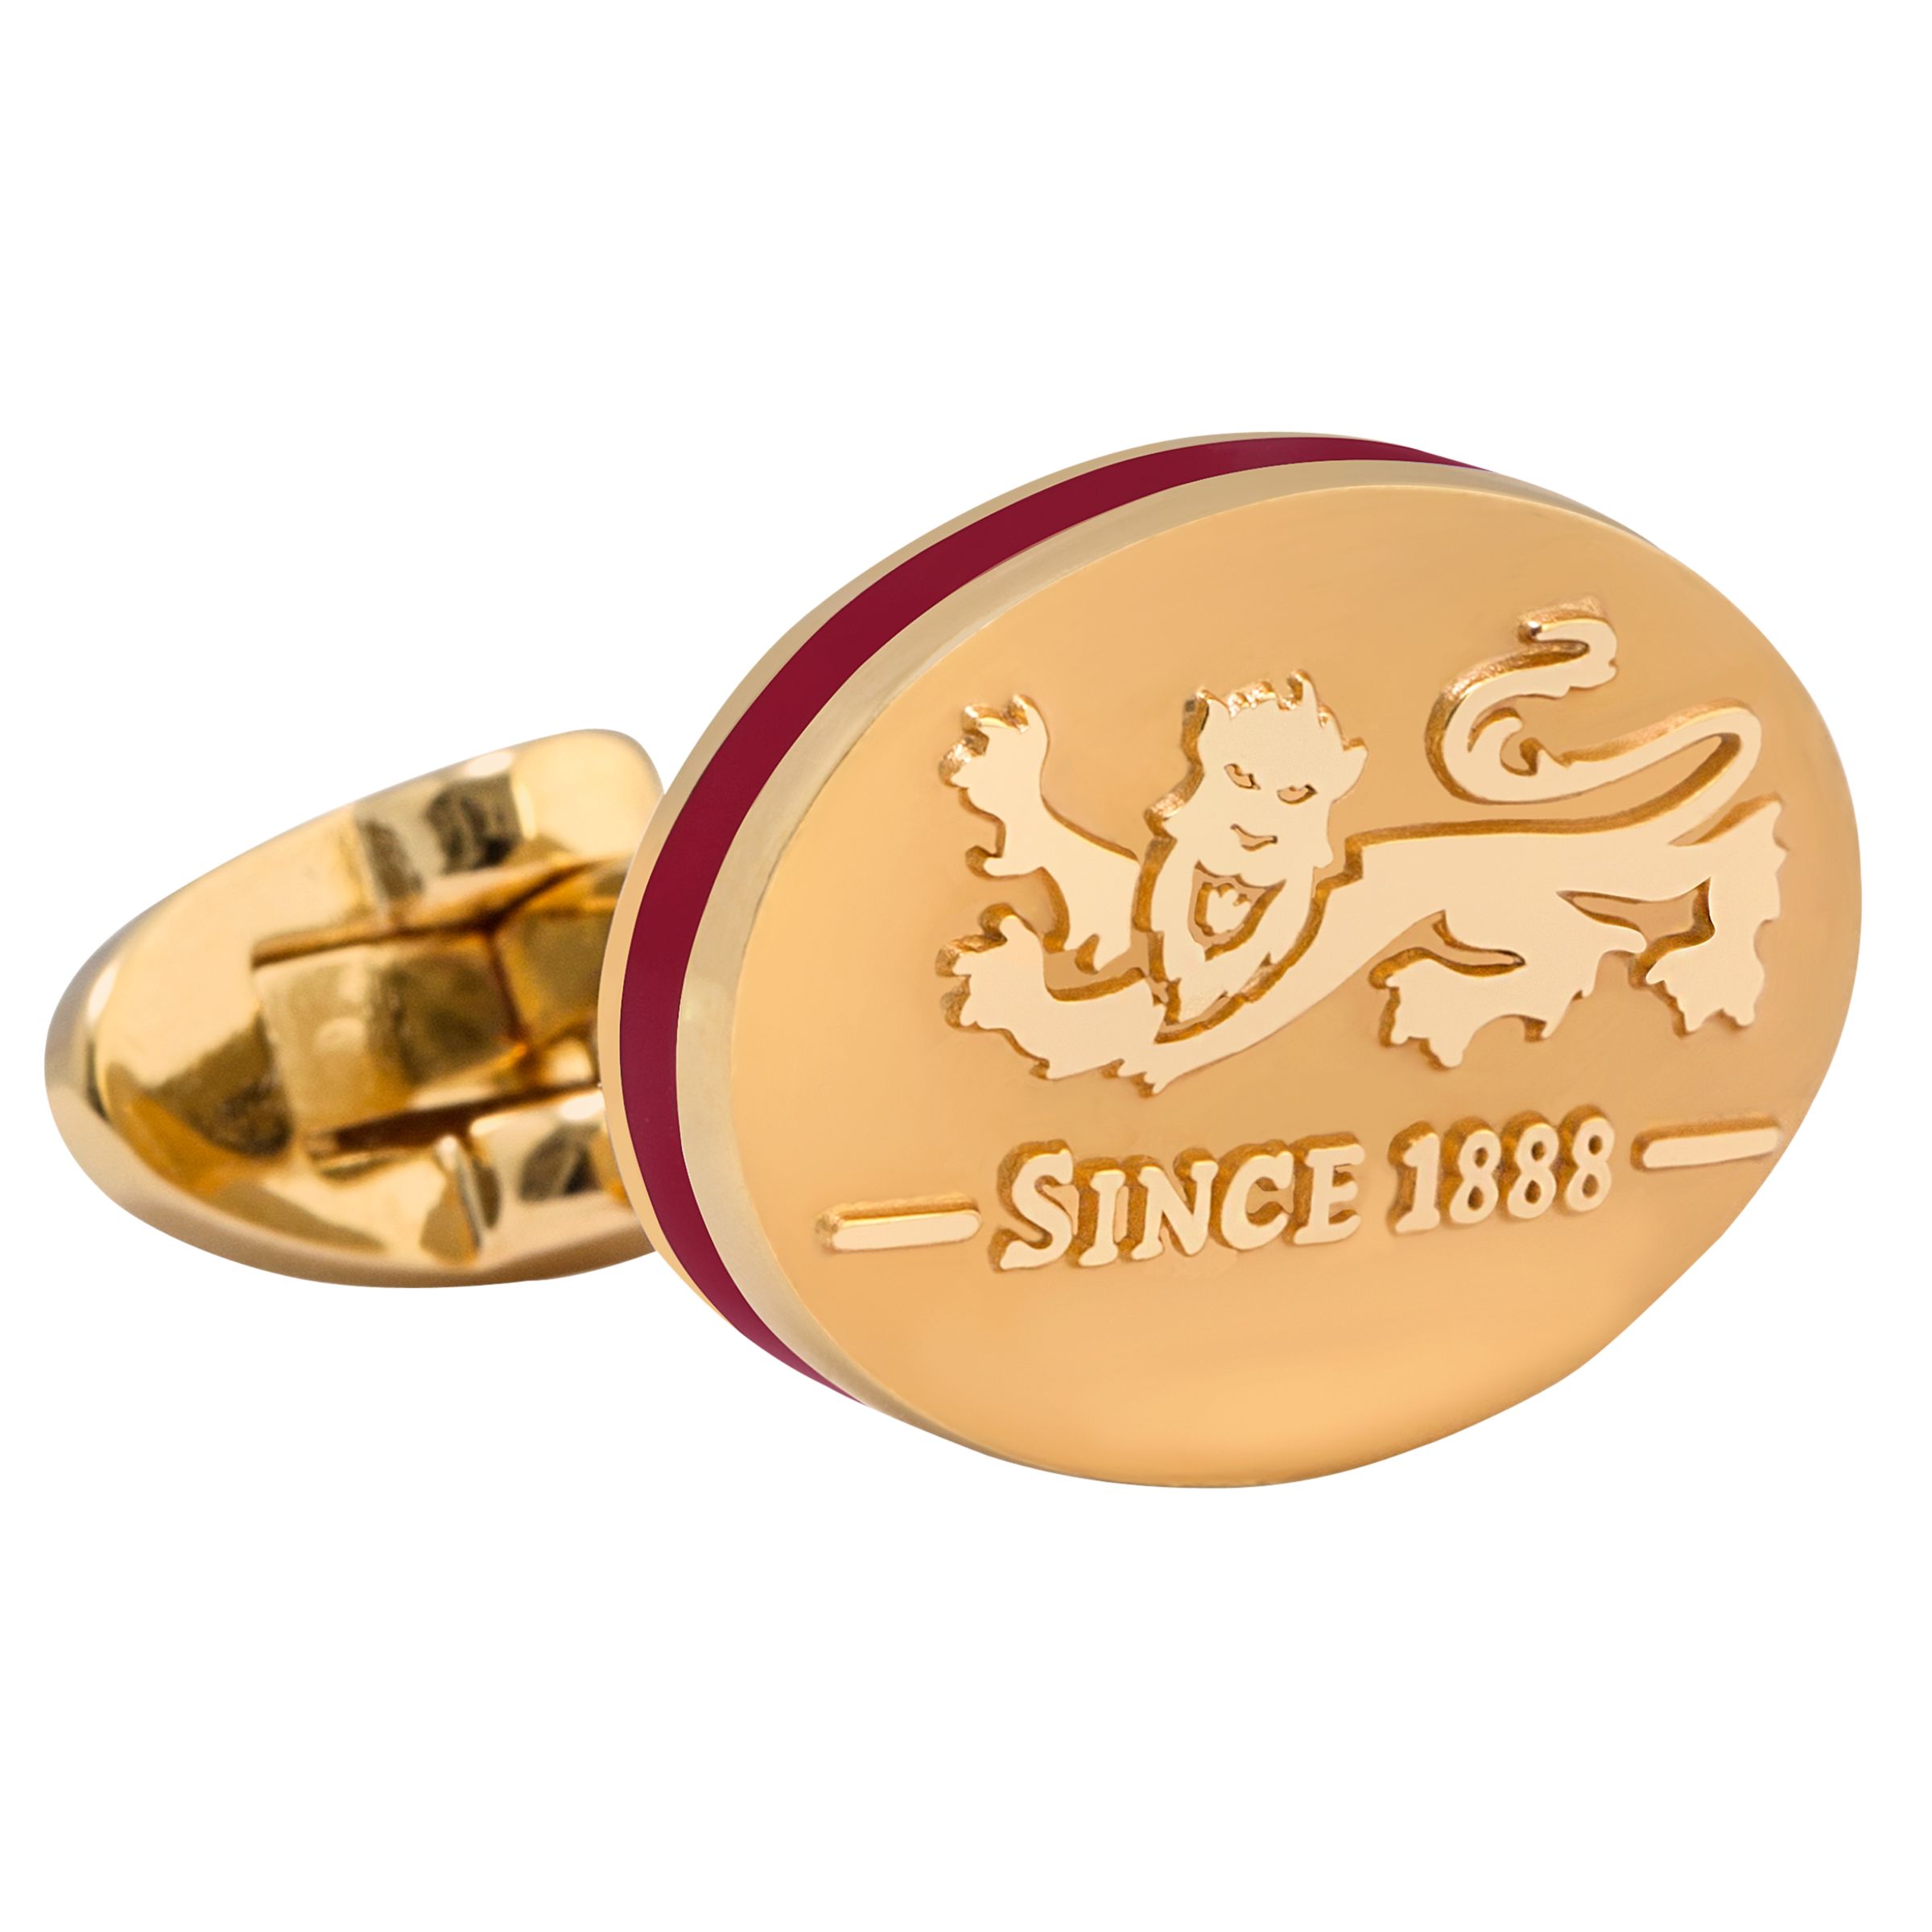 The Lions Collection by Thomas Pink Heraldic Lion Cufflinks, Gold